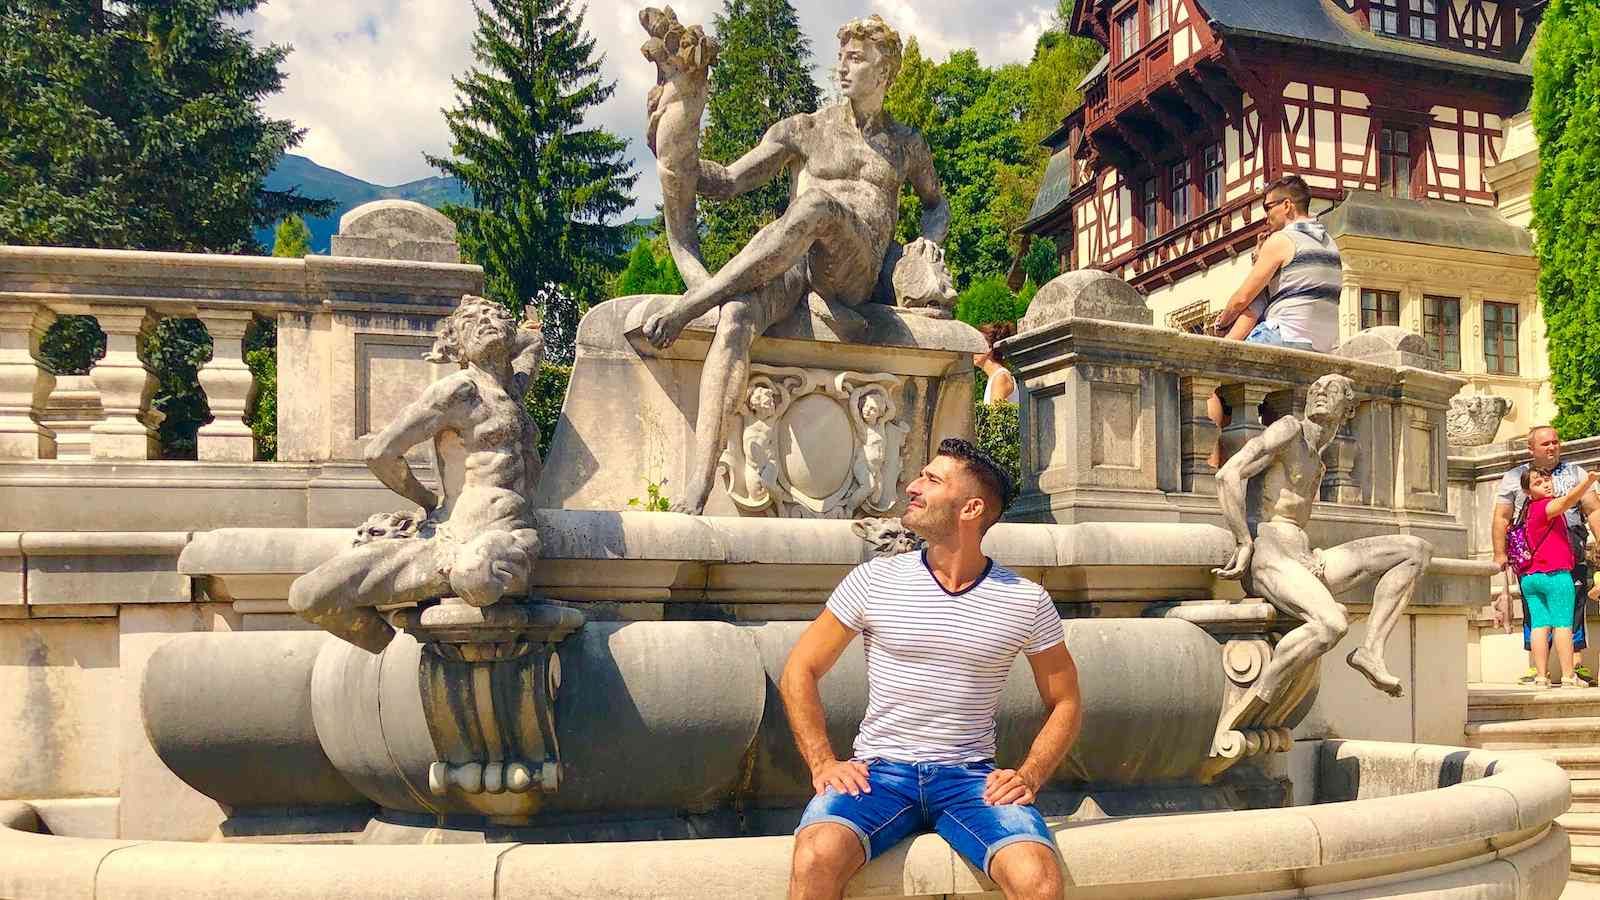 Bucharest is a fun gay friendly city, with some gay bars and clubs - not to mention some pretty gay statues at Peles Castle...